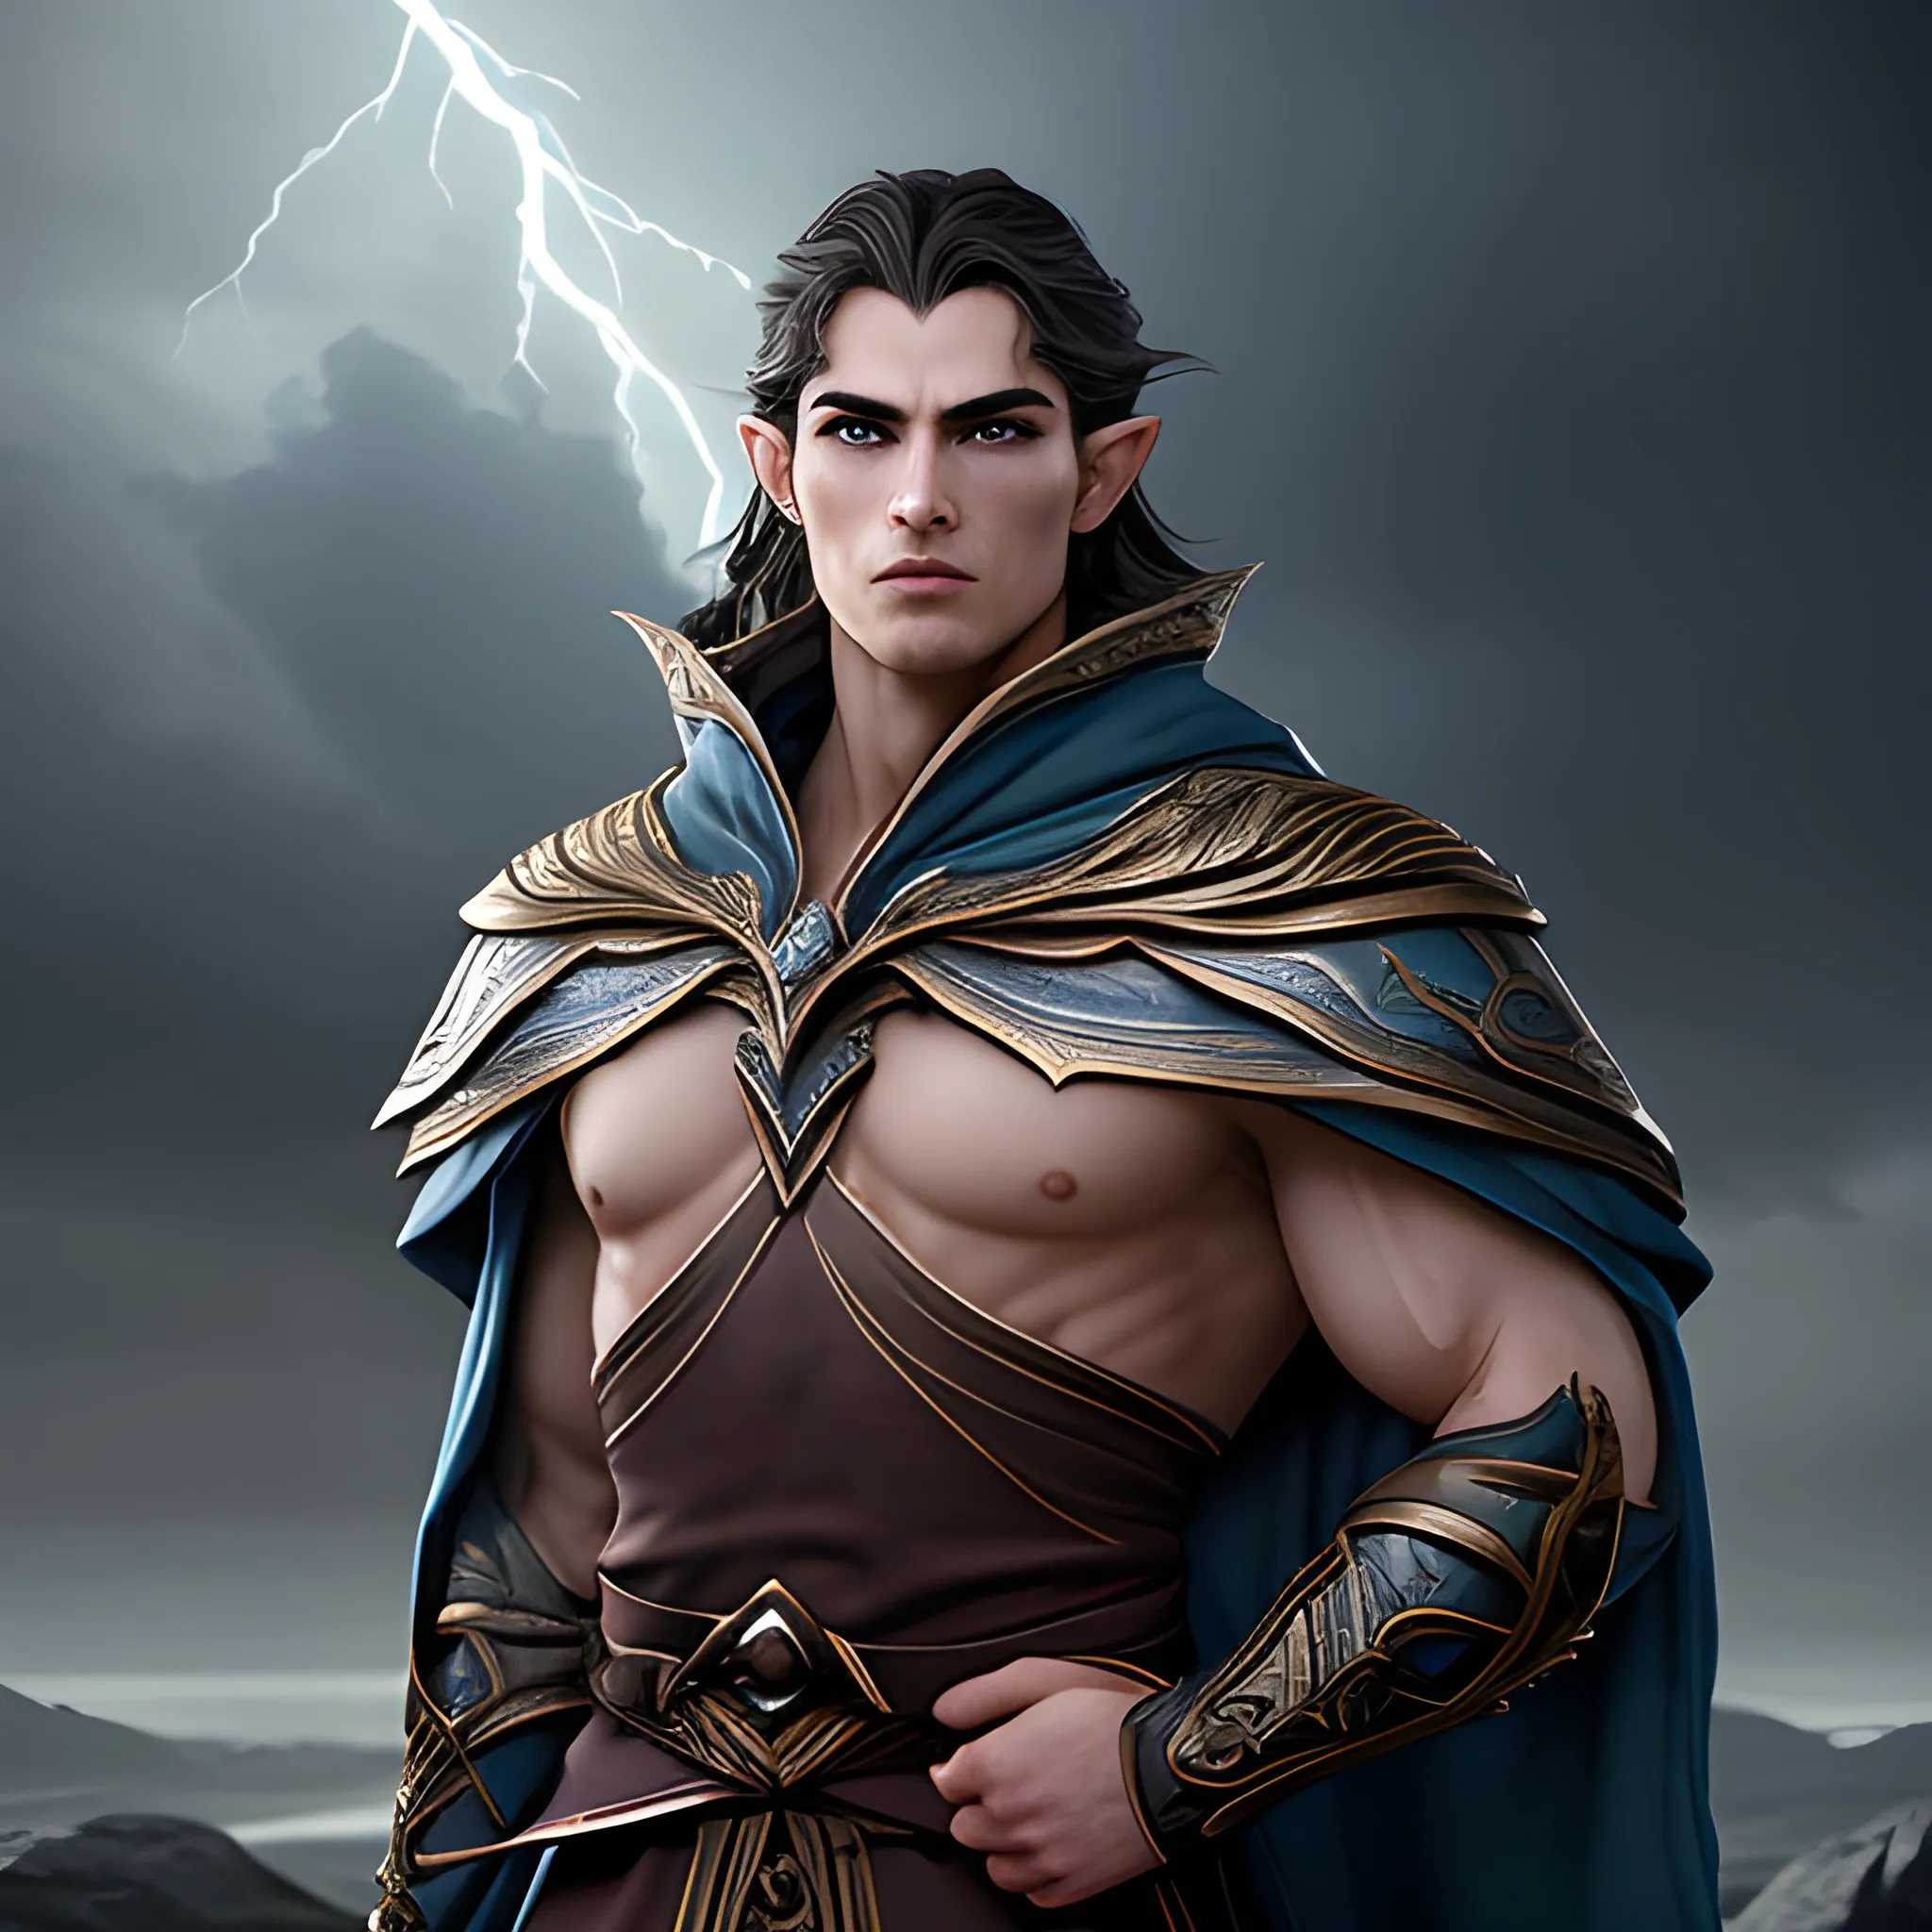 4k, photo realistic,
Kaelen Stormrider possesses a commanding presence, enhanced by his unique combination of elven and human features. Standing at a moderate height, he exudes an air of confidence and strength. His physical appearance reflects his diverse heritage, incorporating the elegance of the elves and the resilience of humans.

Kaelen's facial features are a harmonious blend of refined elven beauty and rugged human strength. His face is framed by dark, wavy hair that falls to his shoulders, accentuating his sharp cheekbones and a strong jawline. His fair skin, tinged with a hint of warmth, highlights the intensity of his piercing eyes.

His eyes, a vibrant shade of sapphire blue, are often described as windows to his soul. They emanate an aura of determination and unwavering focus, reflecting the celestial energies that course through his veins. They are framed by well-defined eyebrows, adding a touch of intensity to his gaze.

Kaelen's physique is lean yet muscular, a testament to his physical prowess and the rigorous training he has undergone. He carries himself with a confident posture, exhibiting a natural grace that hints at his elven heritage. His movements are fluid and precise, a reflection of the martial discipline he has cultivated.

Draped upon his broad shoulders, Kaelen often wears a cloak of deep blue, adorned with intricate silver trimmings that depict celestial motifs. The cloak billows behind him, evoking an image of a storm on the horizon, as if he is a harbinger of both power and tranquility. His attire consists of practical yet finely crafted garments that allow for ease of movement during combat, blending elements of elven elegance and practical human design.

Kaelen's presence is both captivating and enigmatic, drawing the attention of those around him. With his elven grace, human strength, and a gaze that holds the weight of determination, he stands as a formidable figure, ready to face the challenges that lie ahead on Lumina Isle.